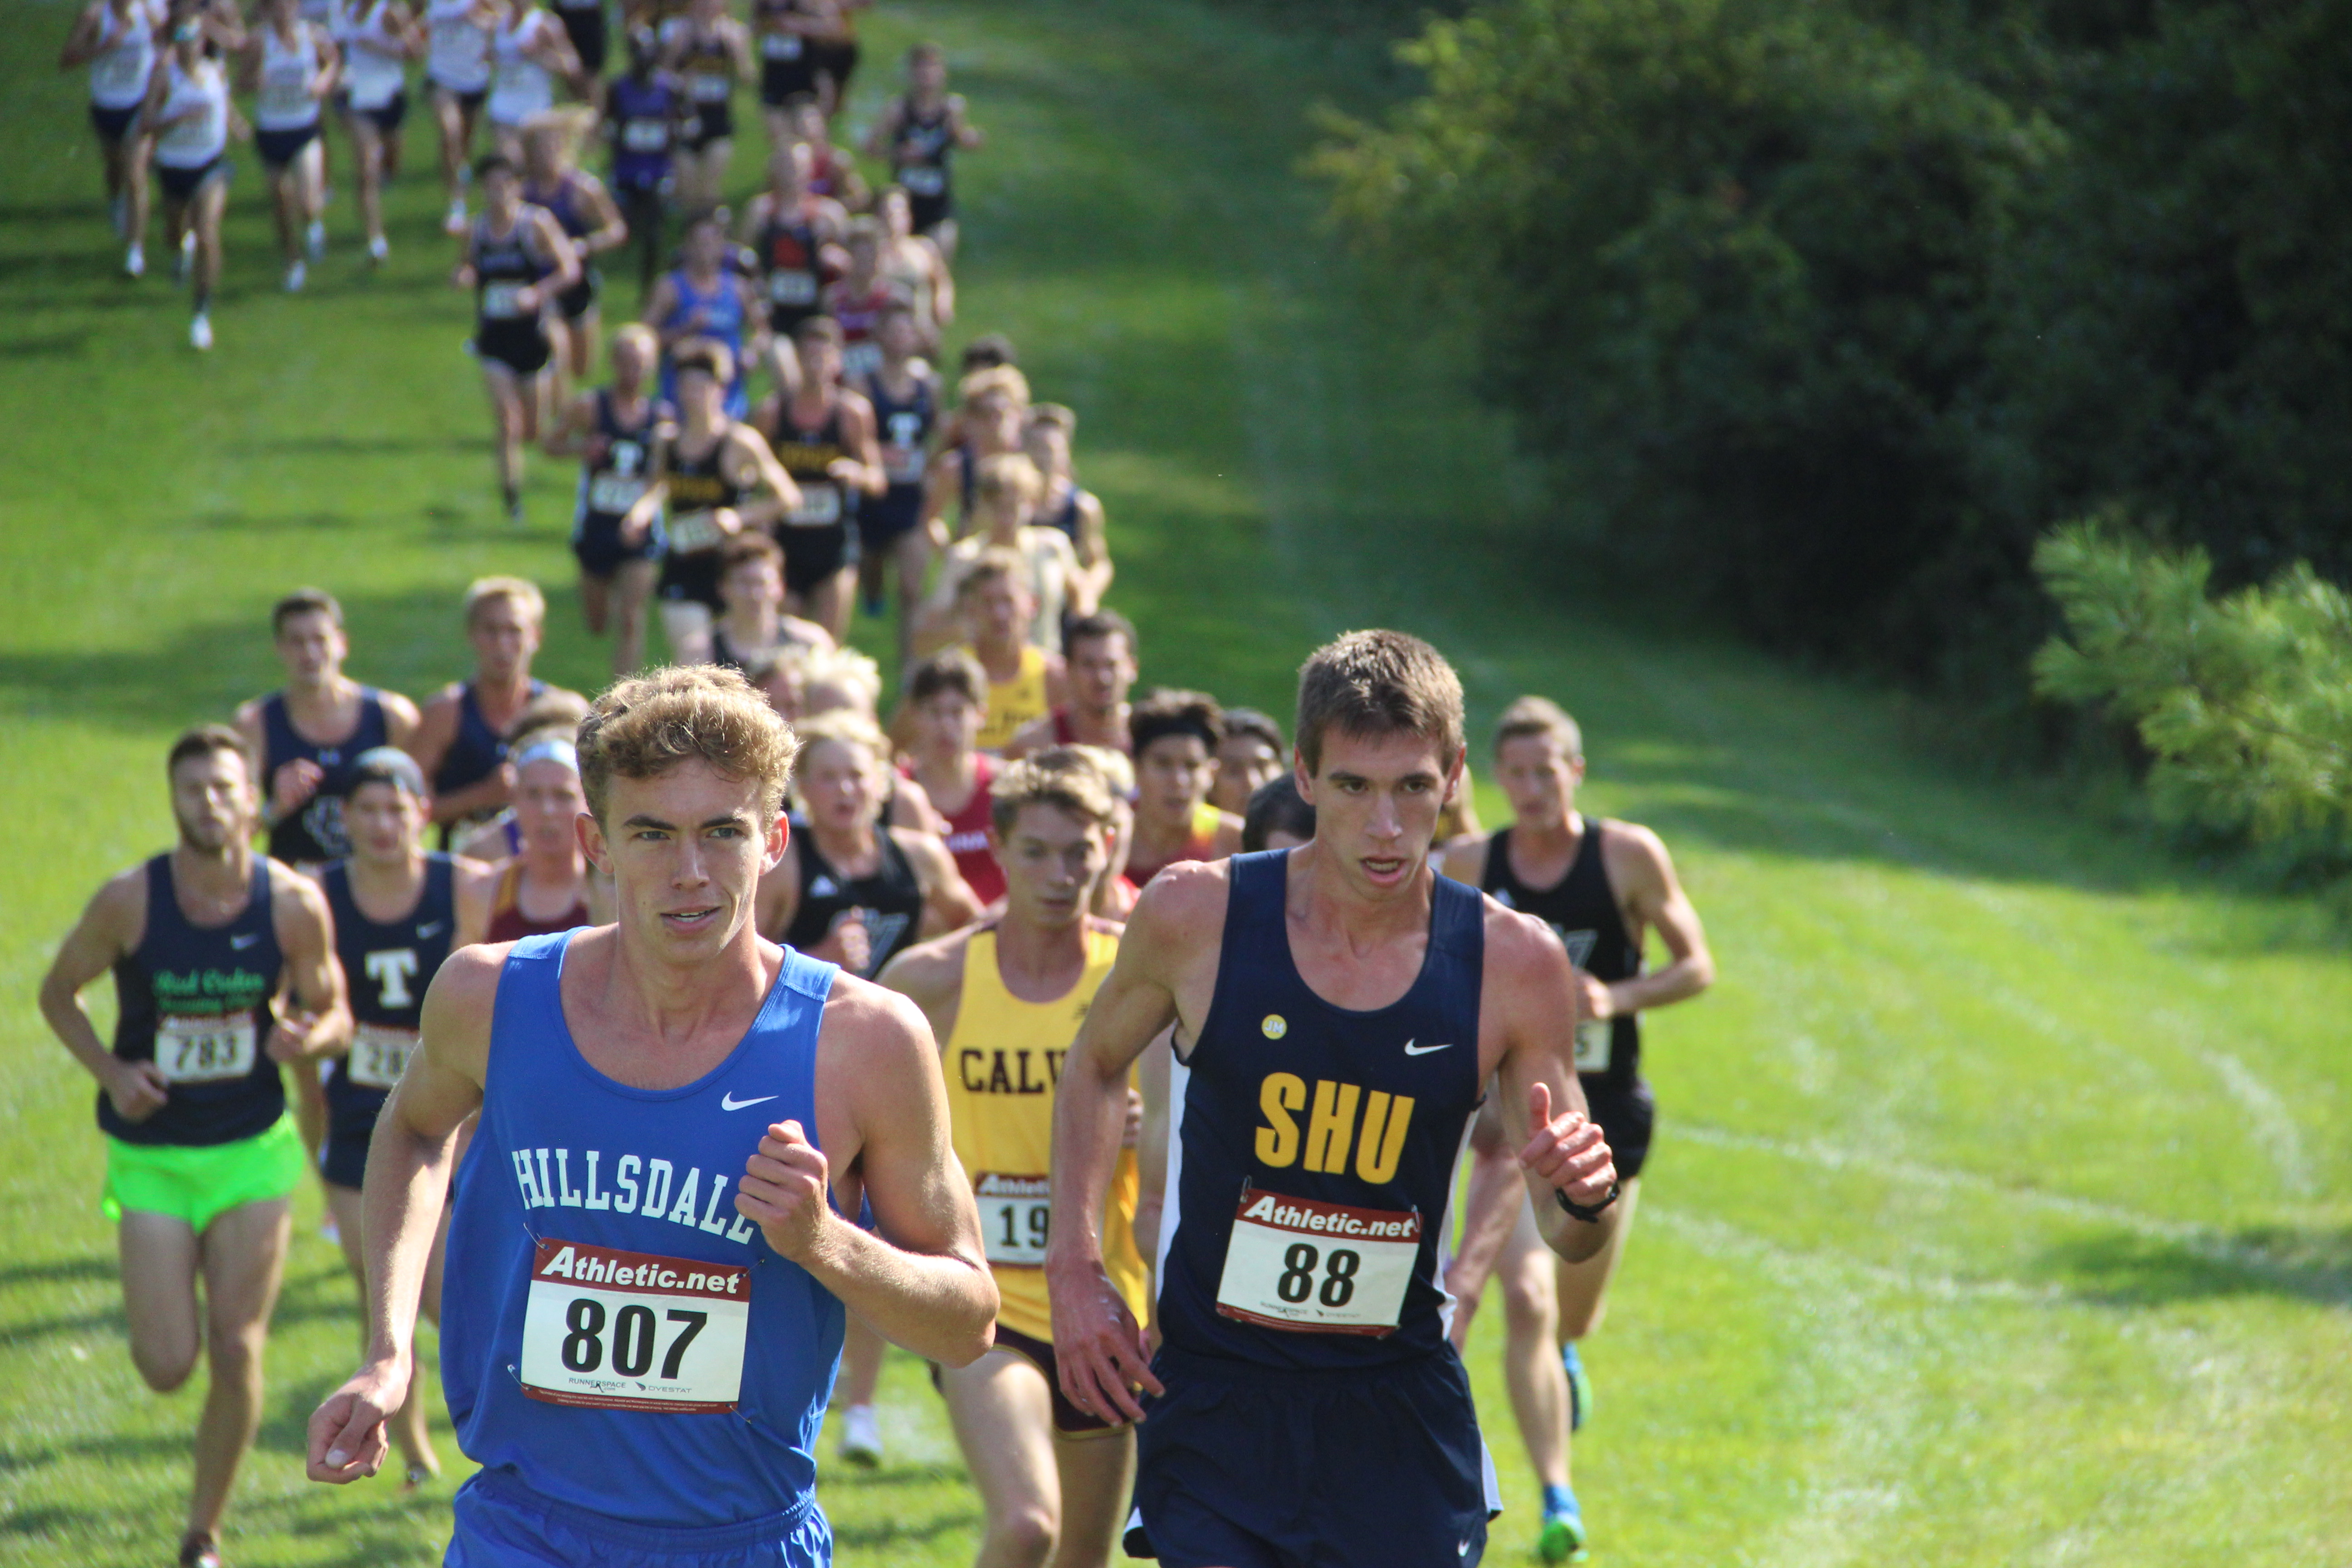 Chargers ready for G-MAC Championship meet